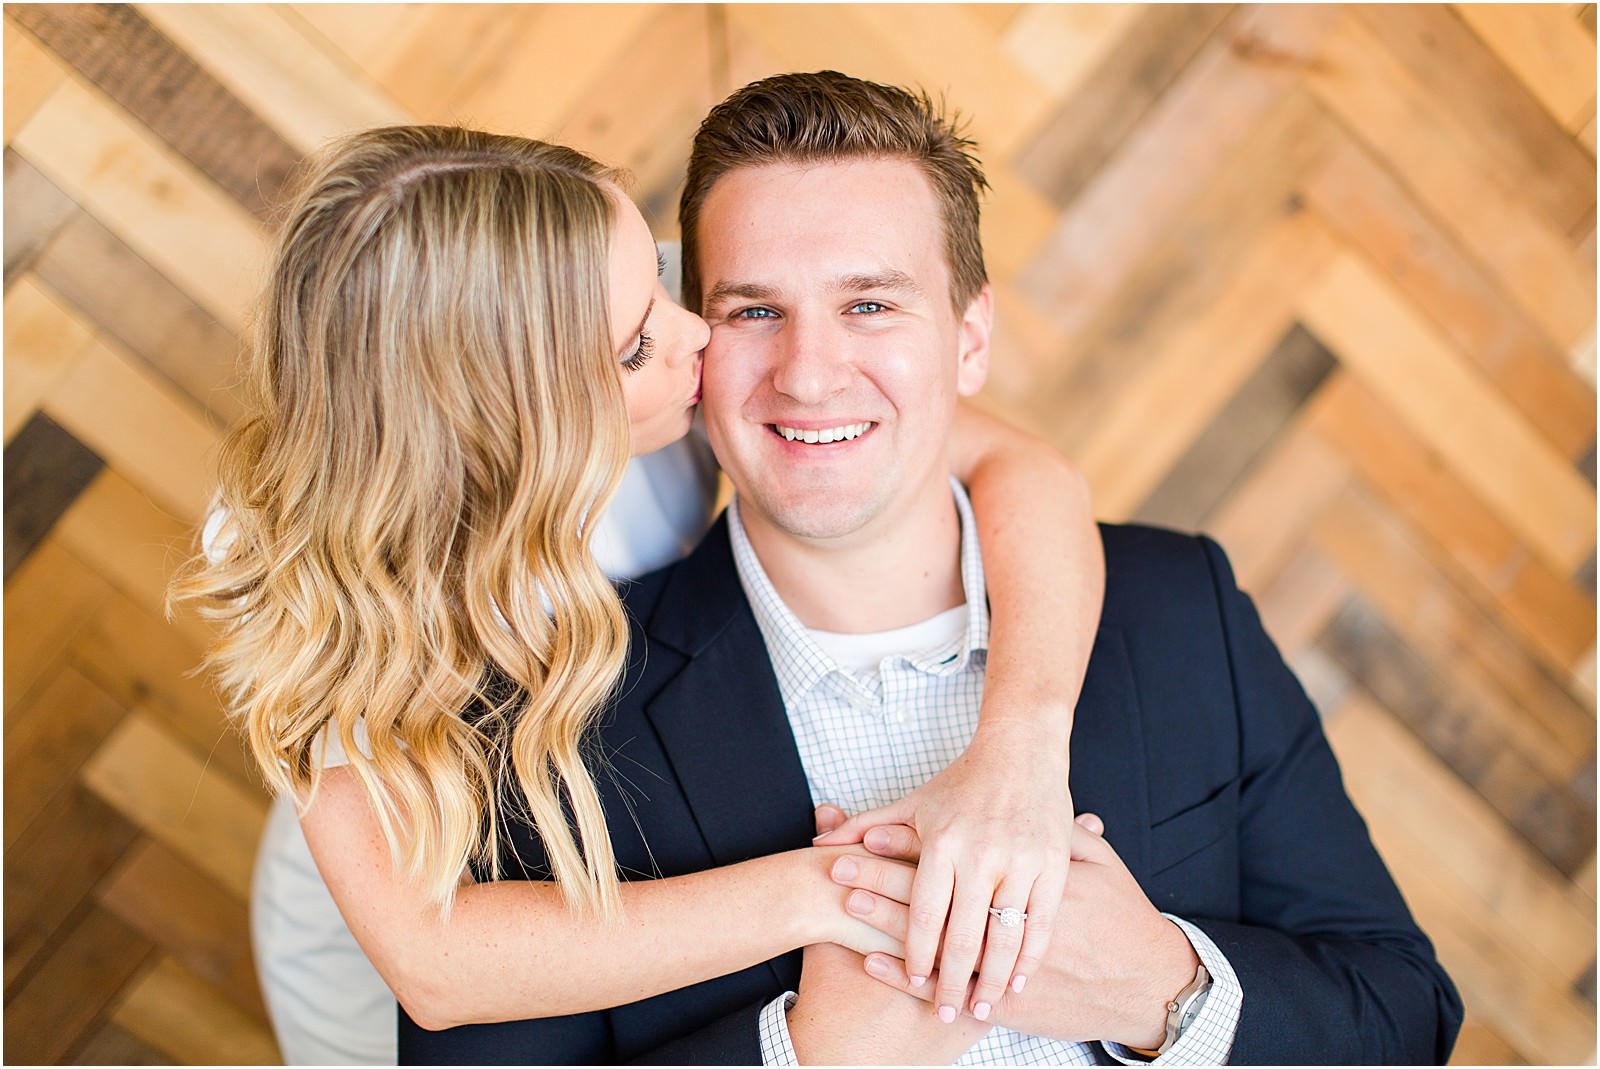 Madison and Christaan | A 20 West Engagement Session in Downto wn Newburgh | Bret and Brandie Photography022.jpg